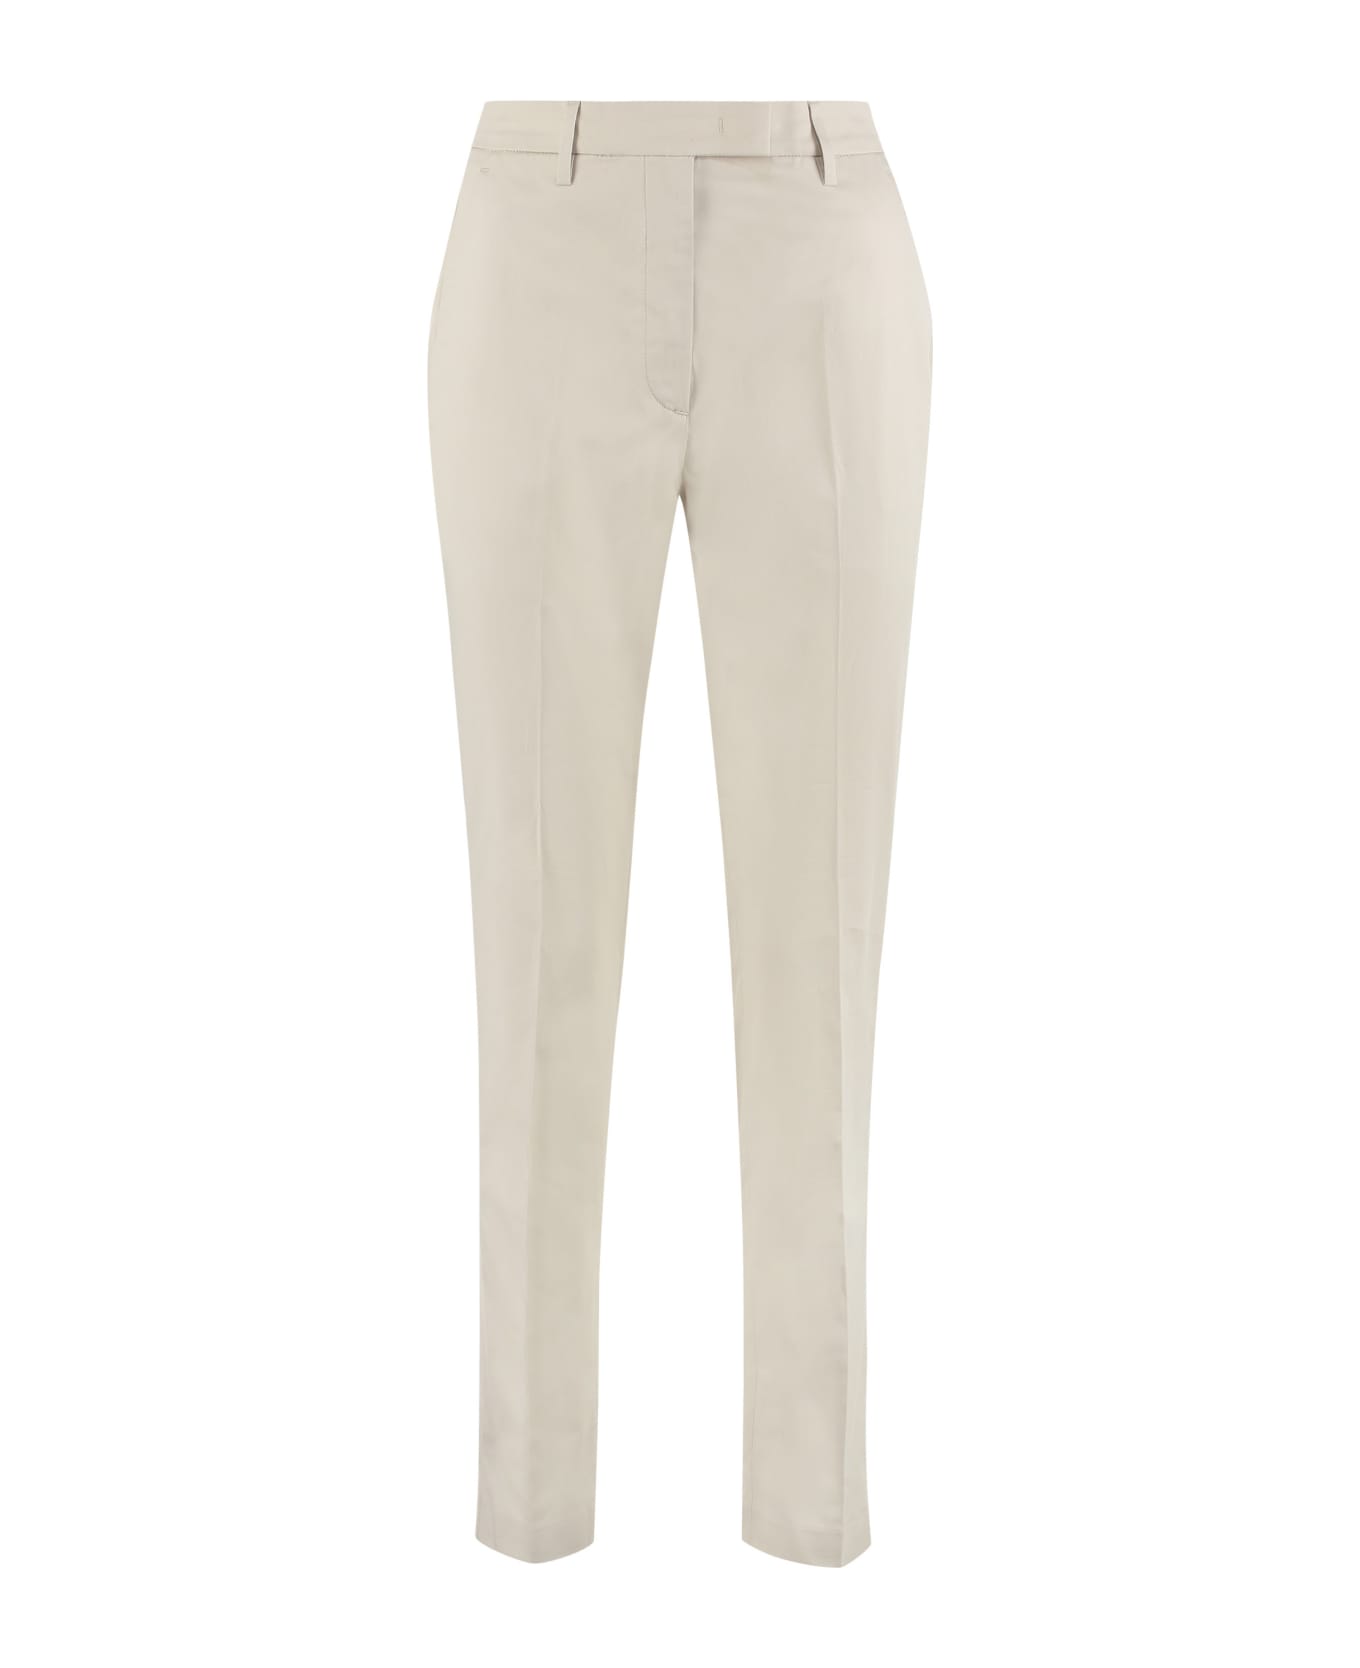 Department Five Stretch Cotton Trousers - Beige ボトムス